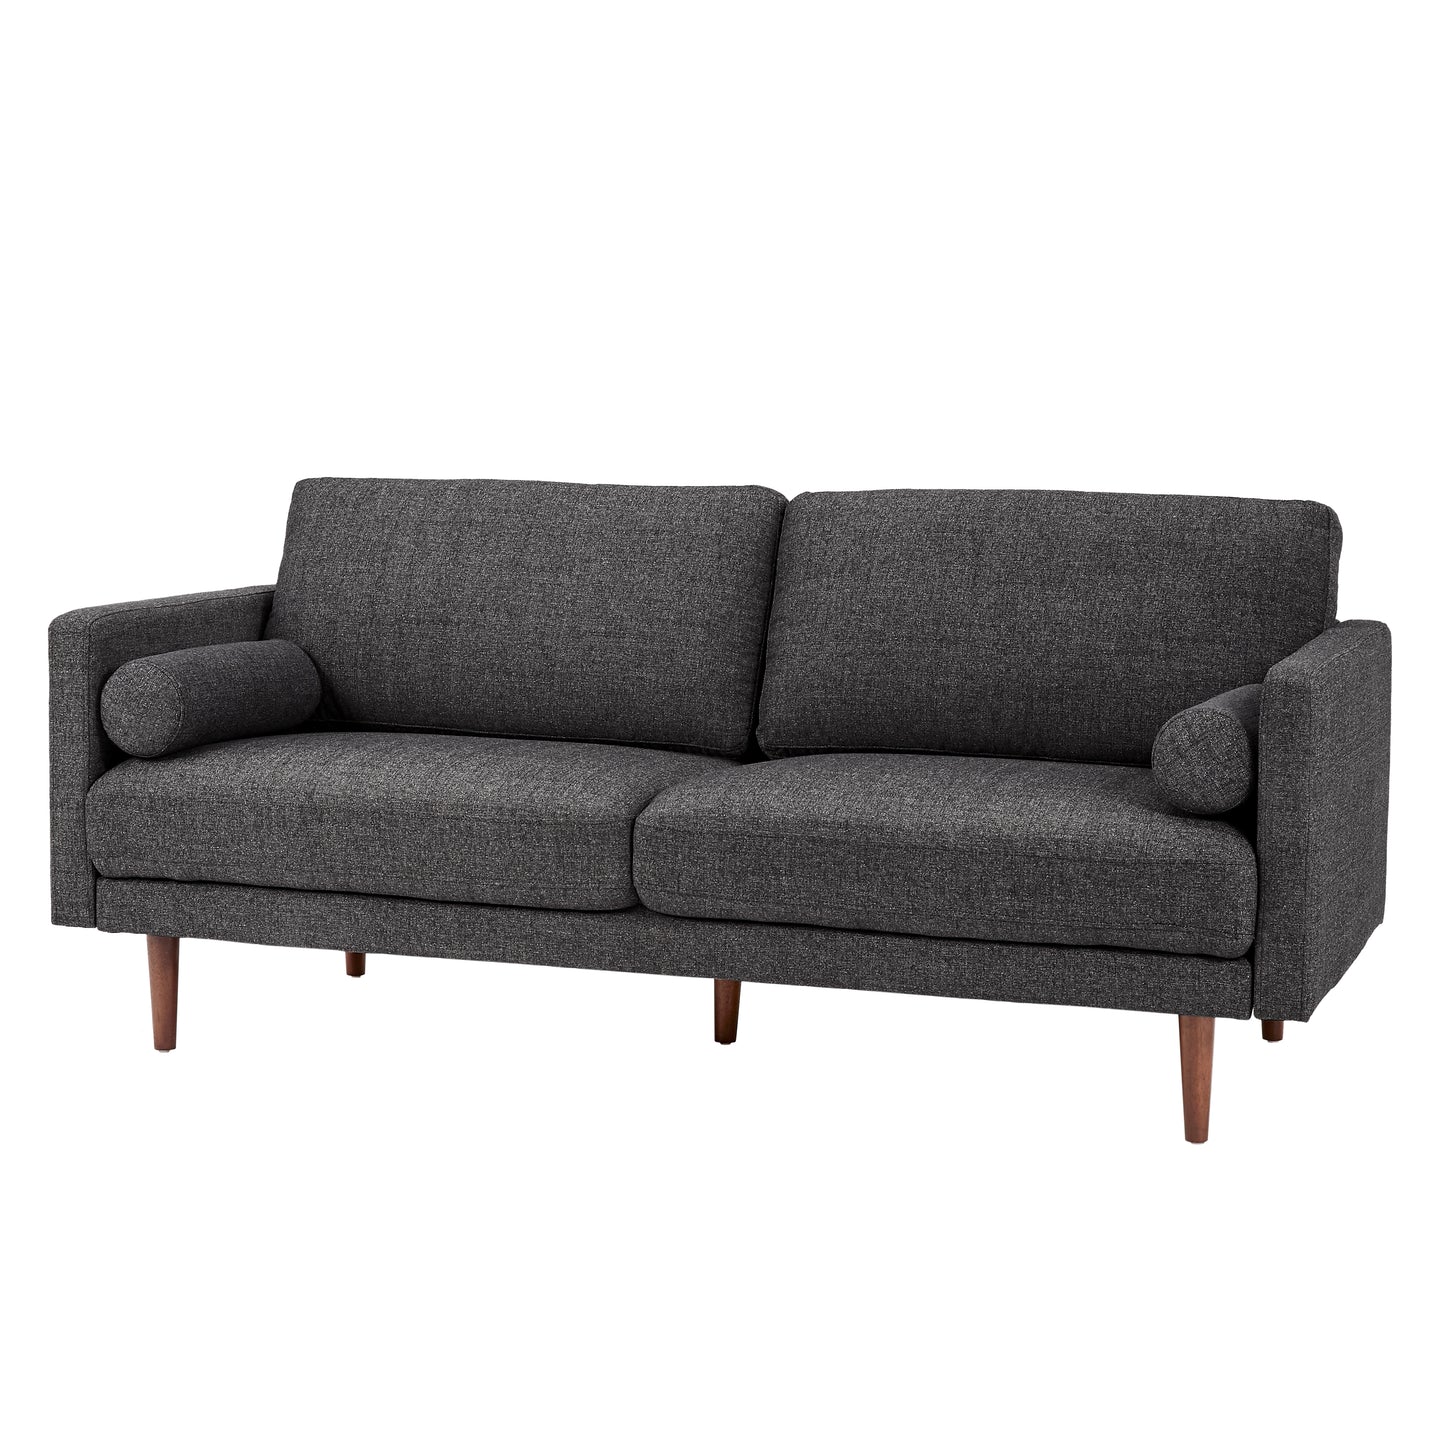 Mid-Century Tapered Leg Sofa with Pillows - Black Heathered Weave